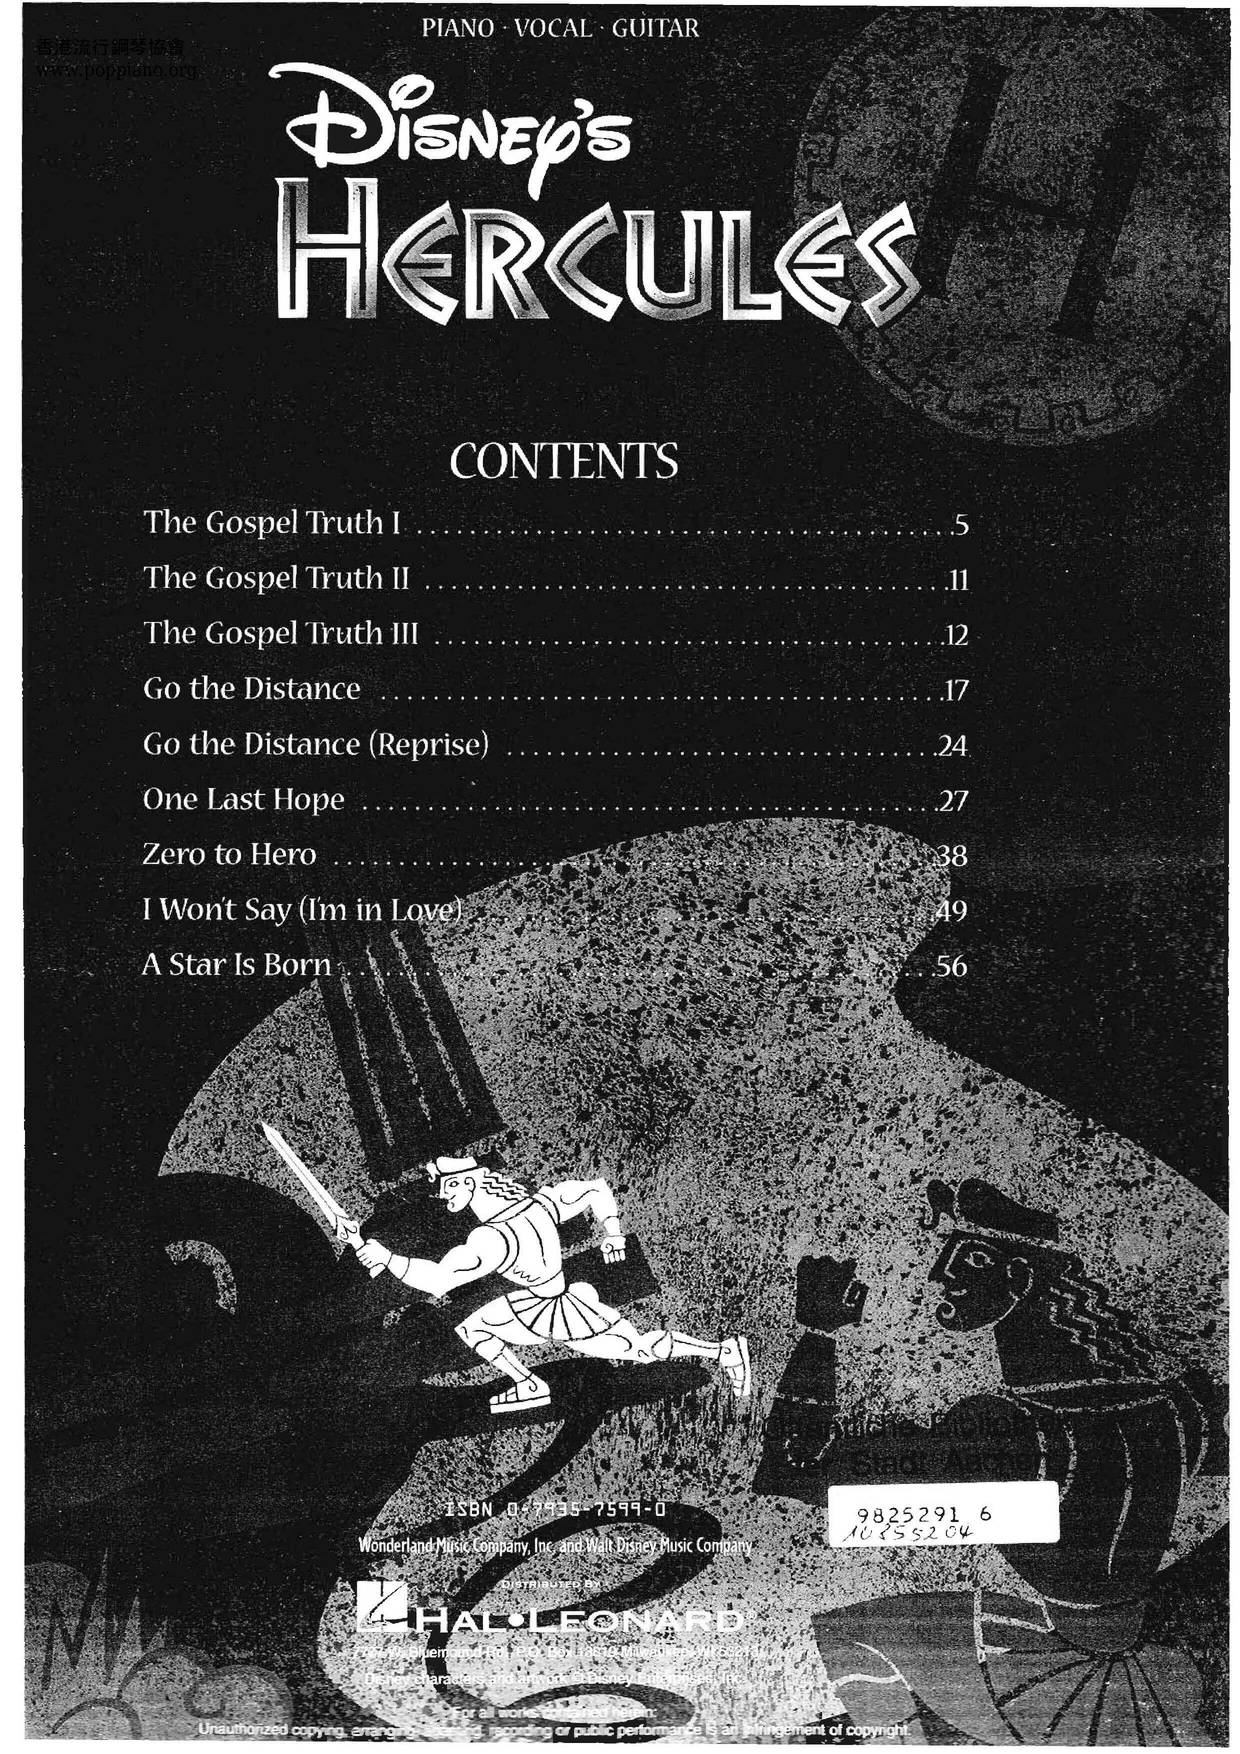 Hercules - Song Book 48 Pages琴譜